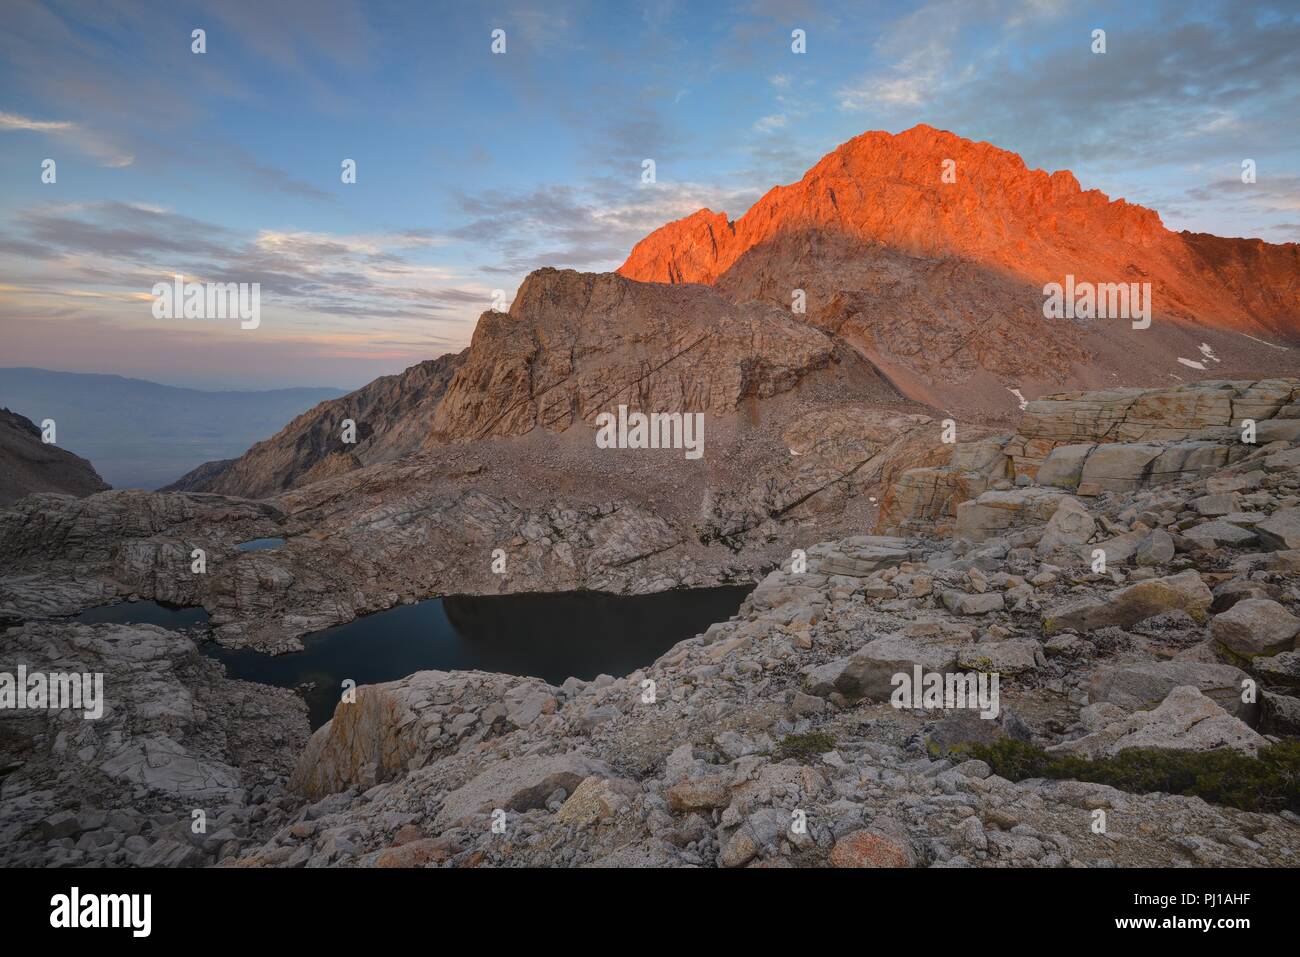 Mt Williamson at sunset, Kings Canyon National Park, California, United States Stock Photo